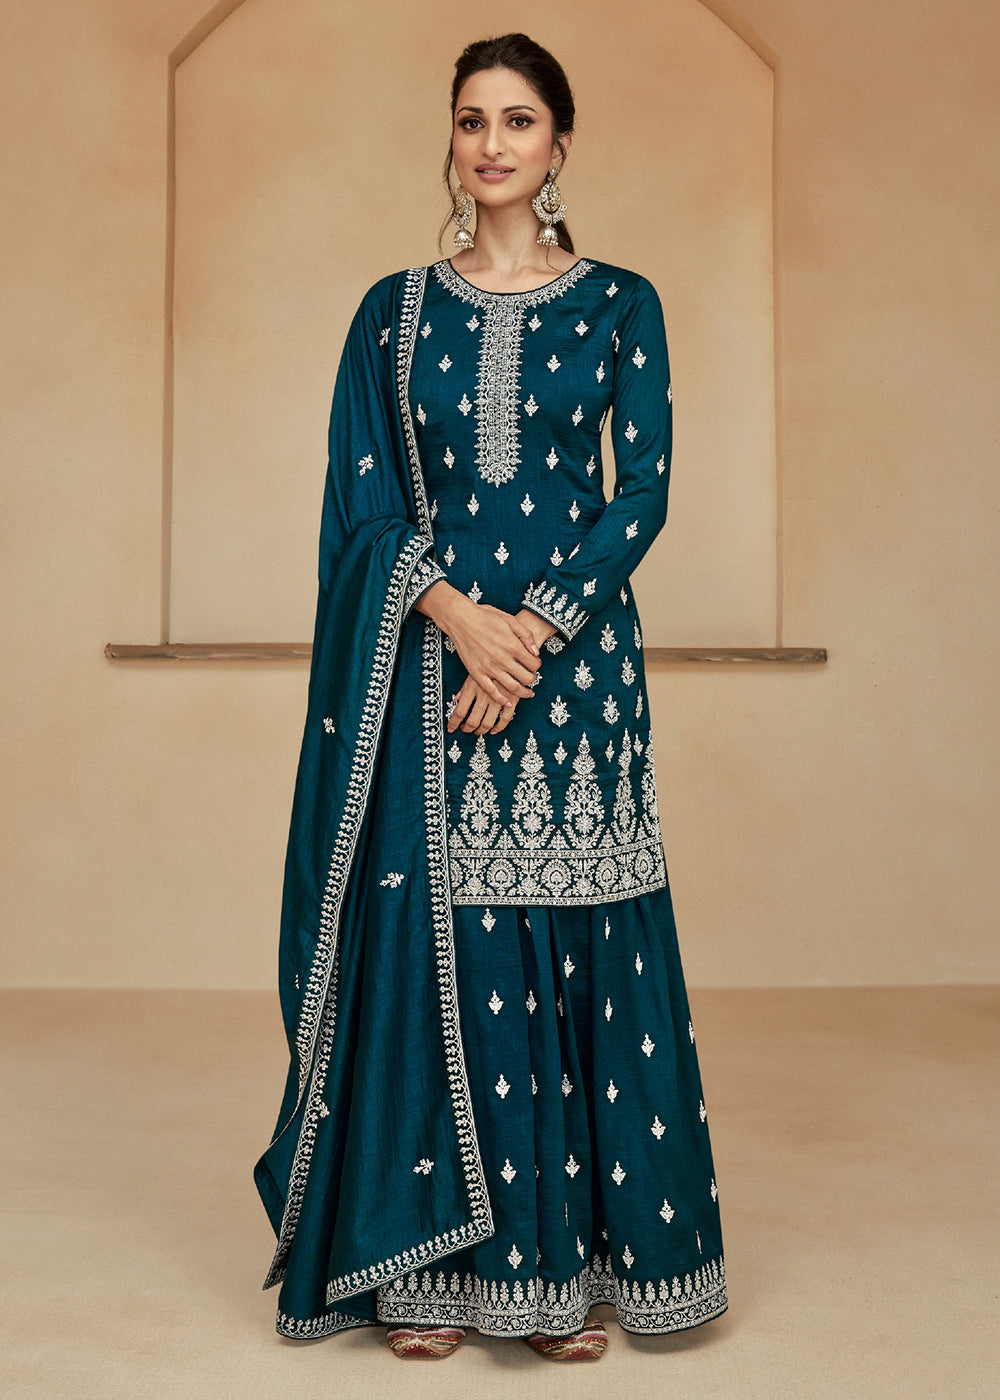 Buy Now Teal Blue Zari & Sequins Work Palazzo Salwar Suit Online in USA, UK, Canada, Germany, Australia & Worldwide at Empress Clothing. 